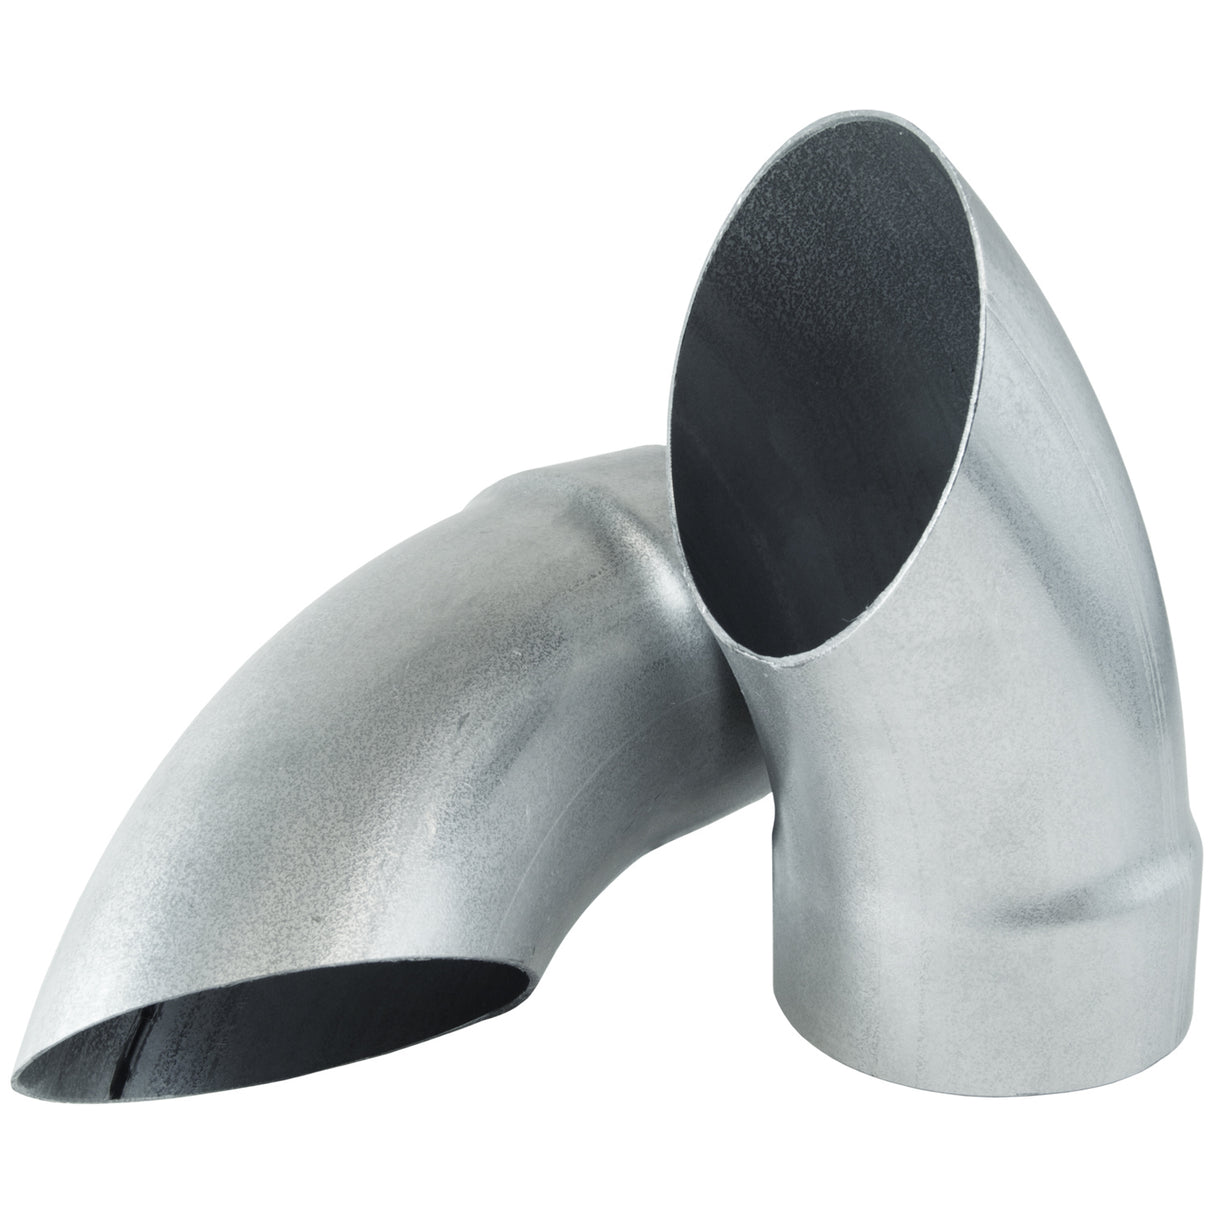 T3030 Exhaust Tail Pipe Tip